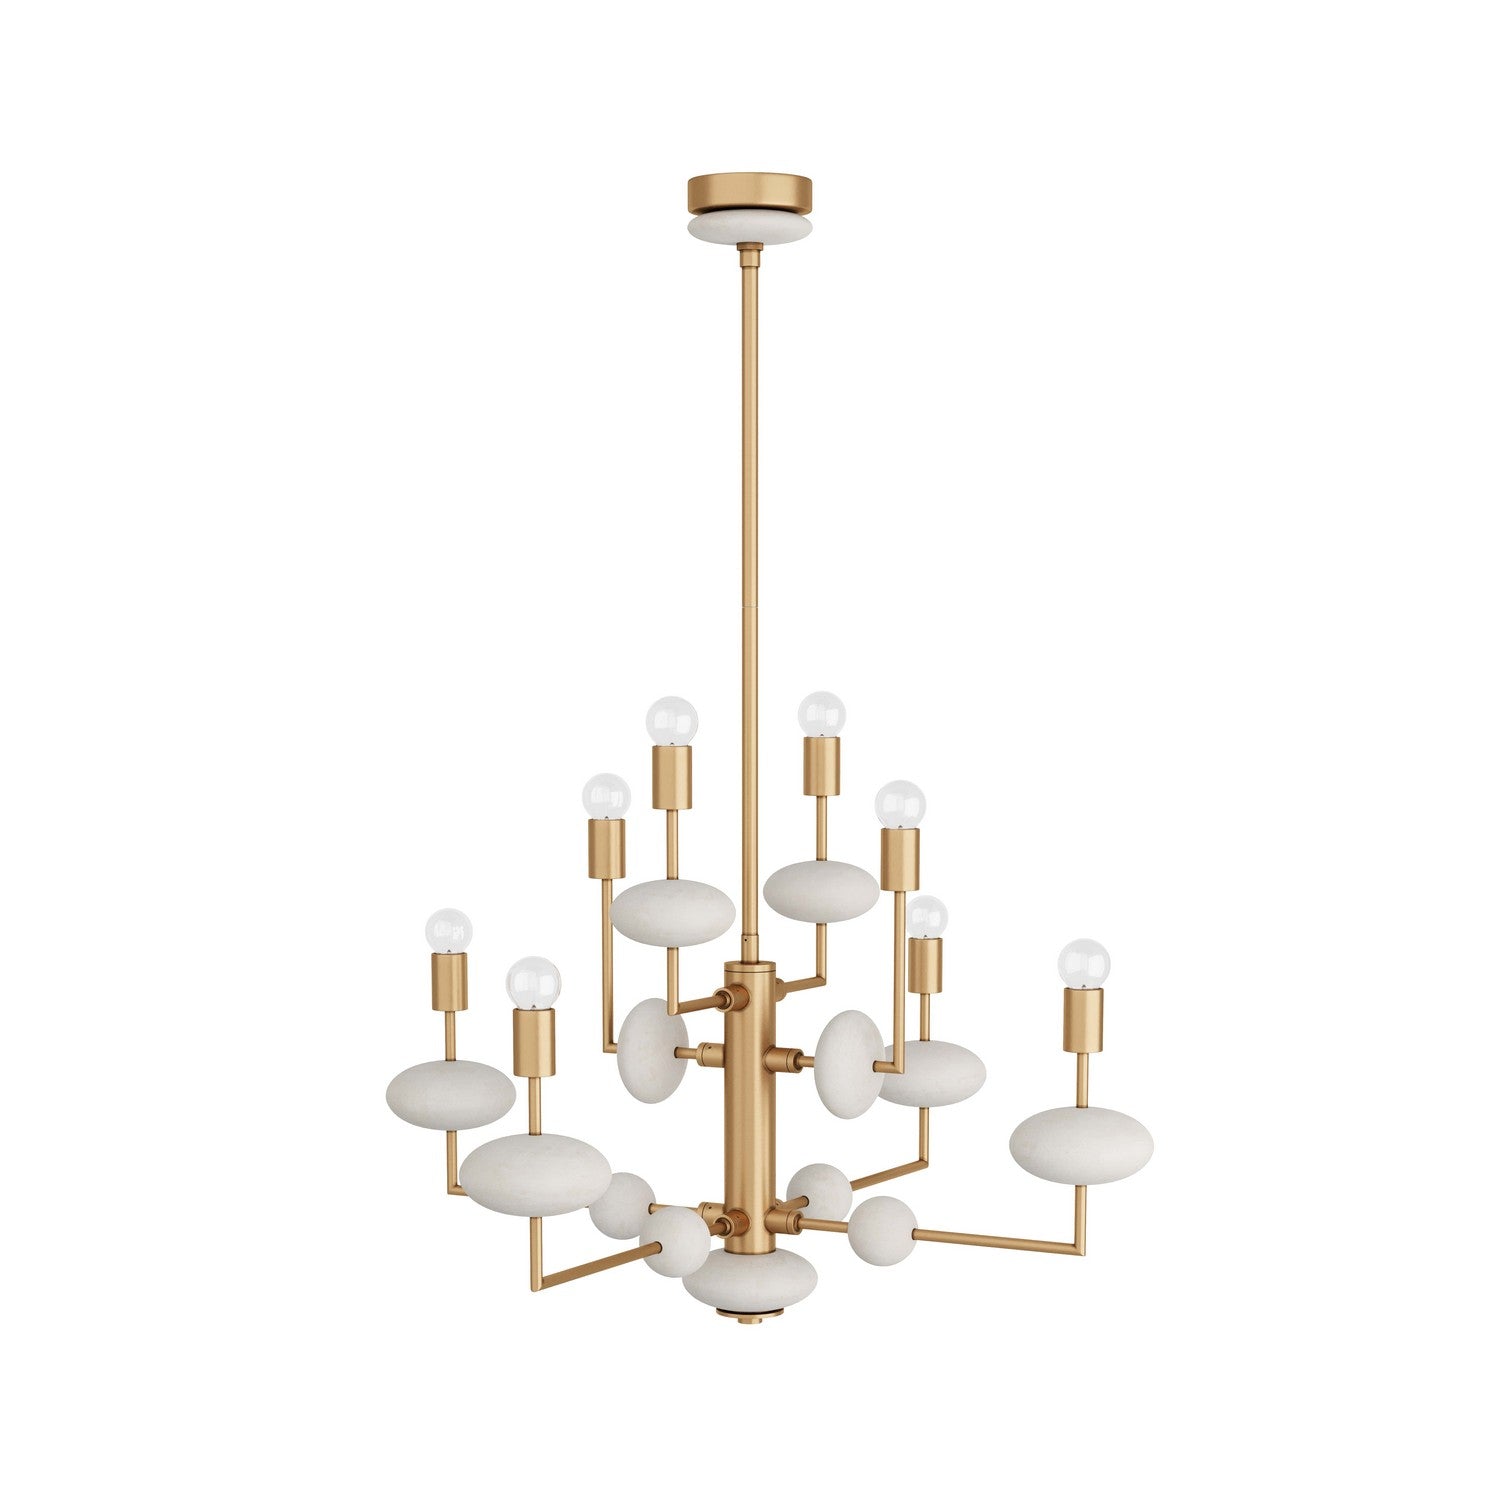 Eight Light Chandelier from the Vista collection in Antique Brass finish